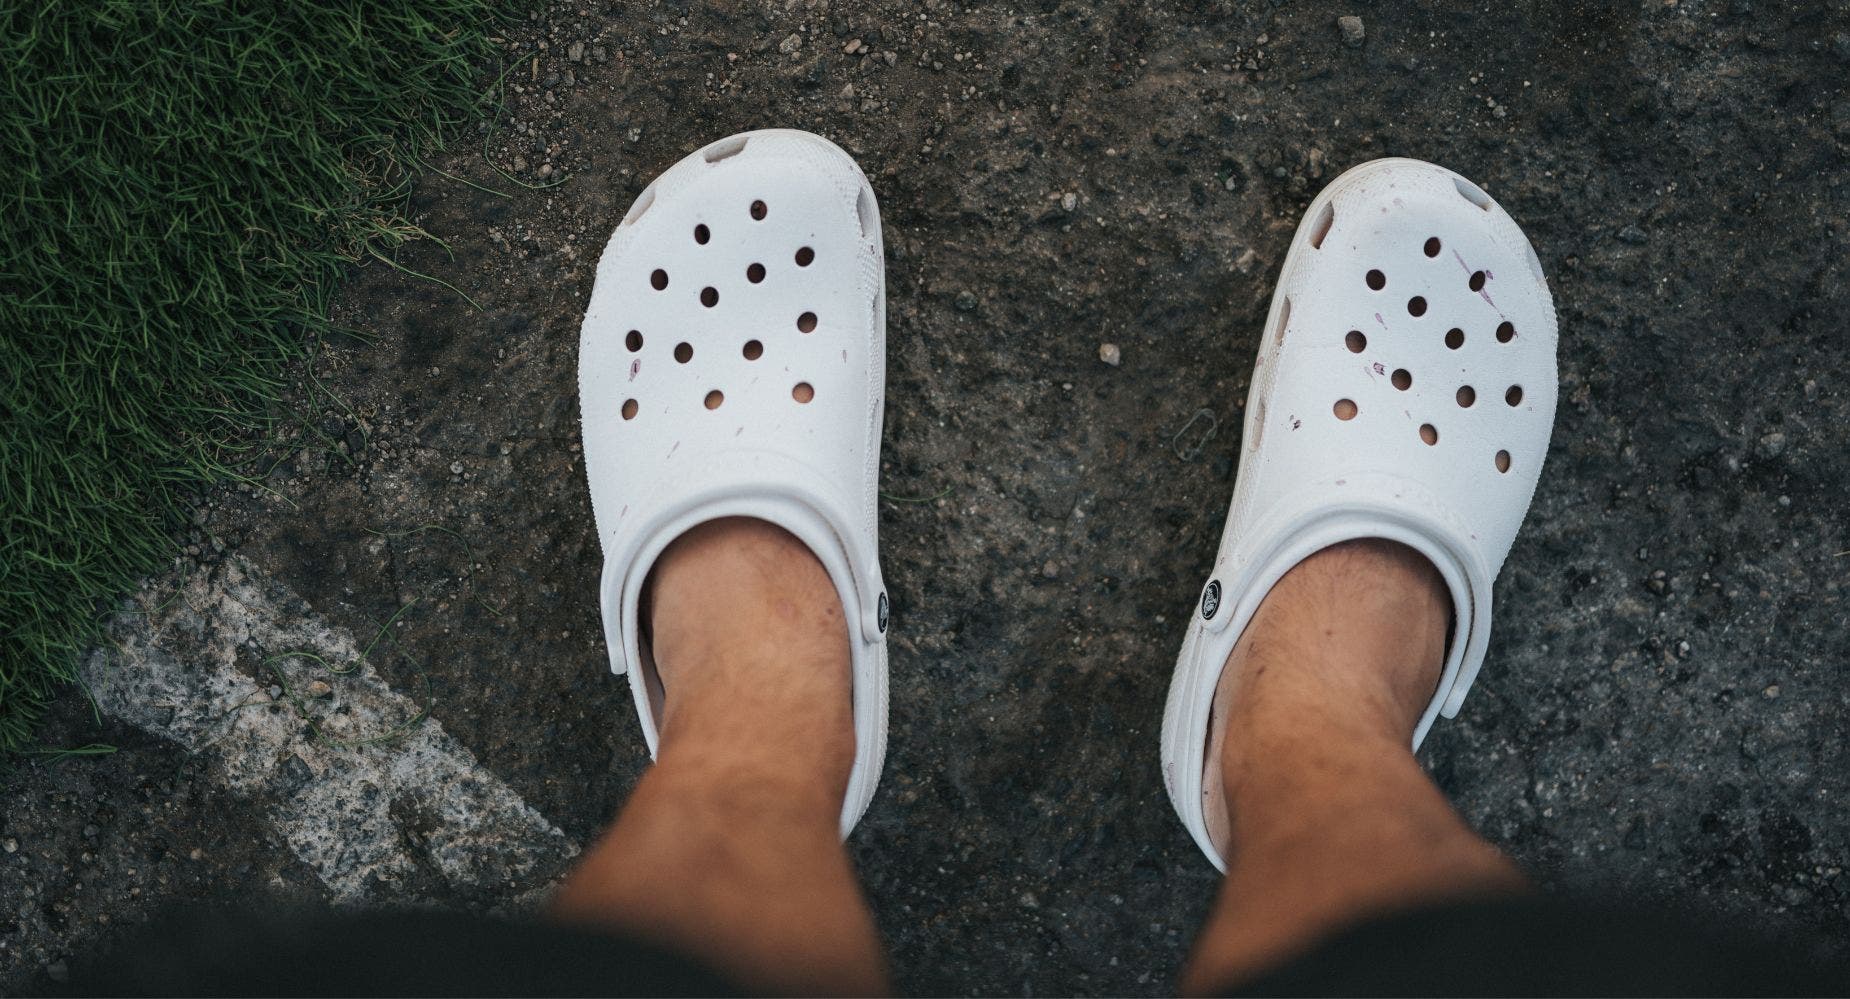 Exclusive: Could Crocs Be The Number One Opportunity In Retail Right Now? Here's What Social Arb Investor Chris Camillo Says